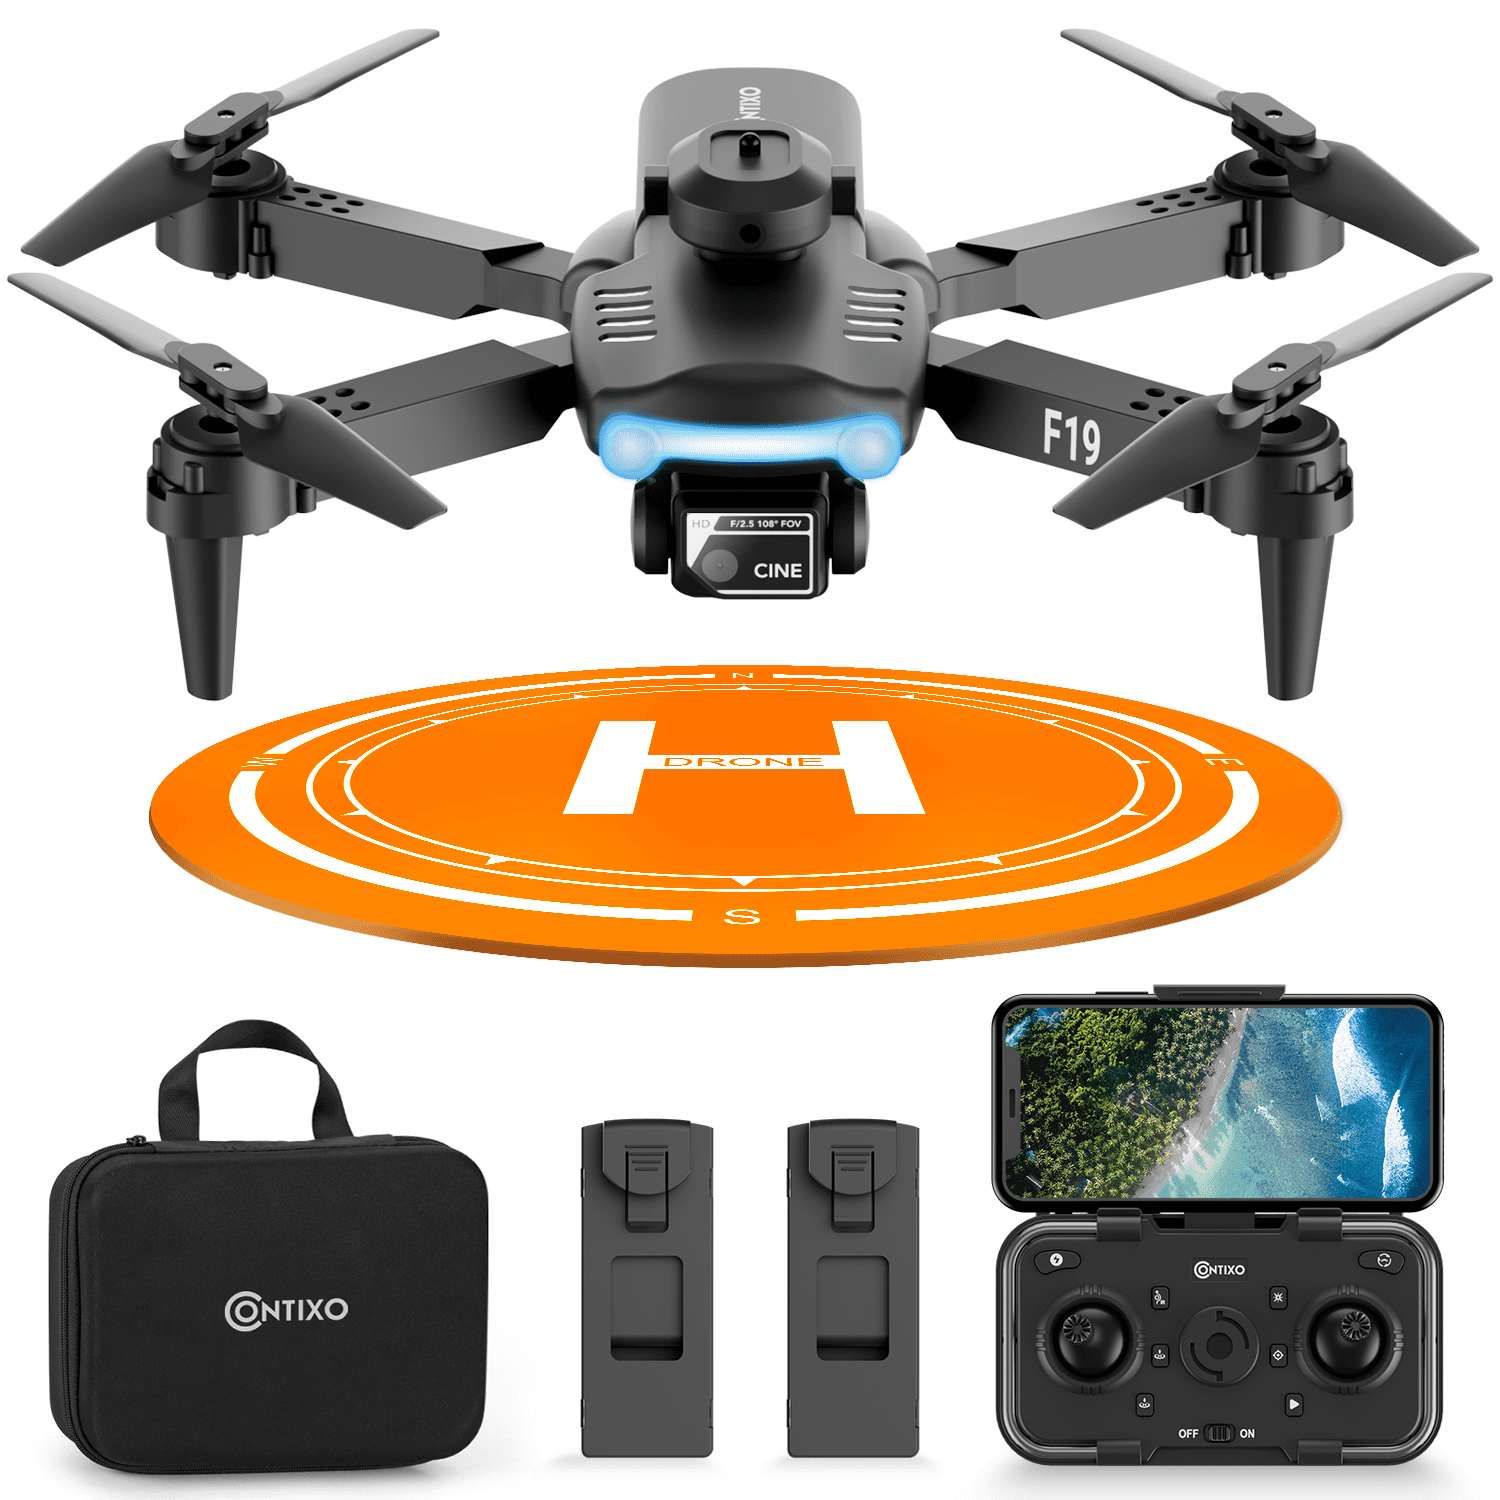 Til ære for oversøisk Barmhjertige Contixo F19 Drone with 1080P Camera for Adults & Children – RC Quadcopter  with Four-Way Obstacle Avoidance, Follow Me, Waypoint Fly, Altitude Hold,  Headless Mode, 20 Mins Long Flight - Walmart.com